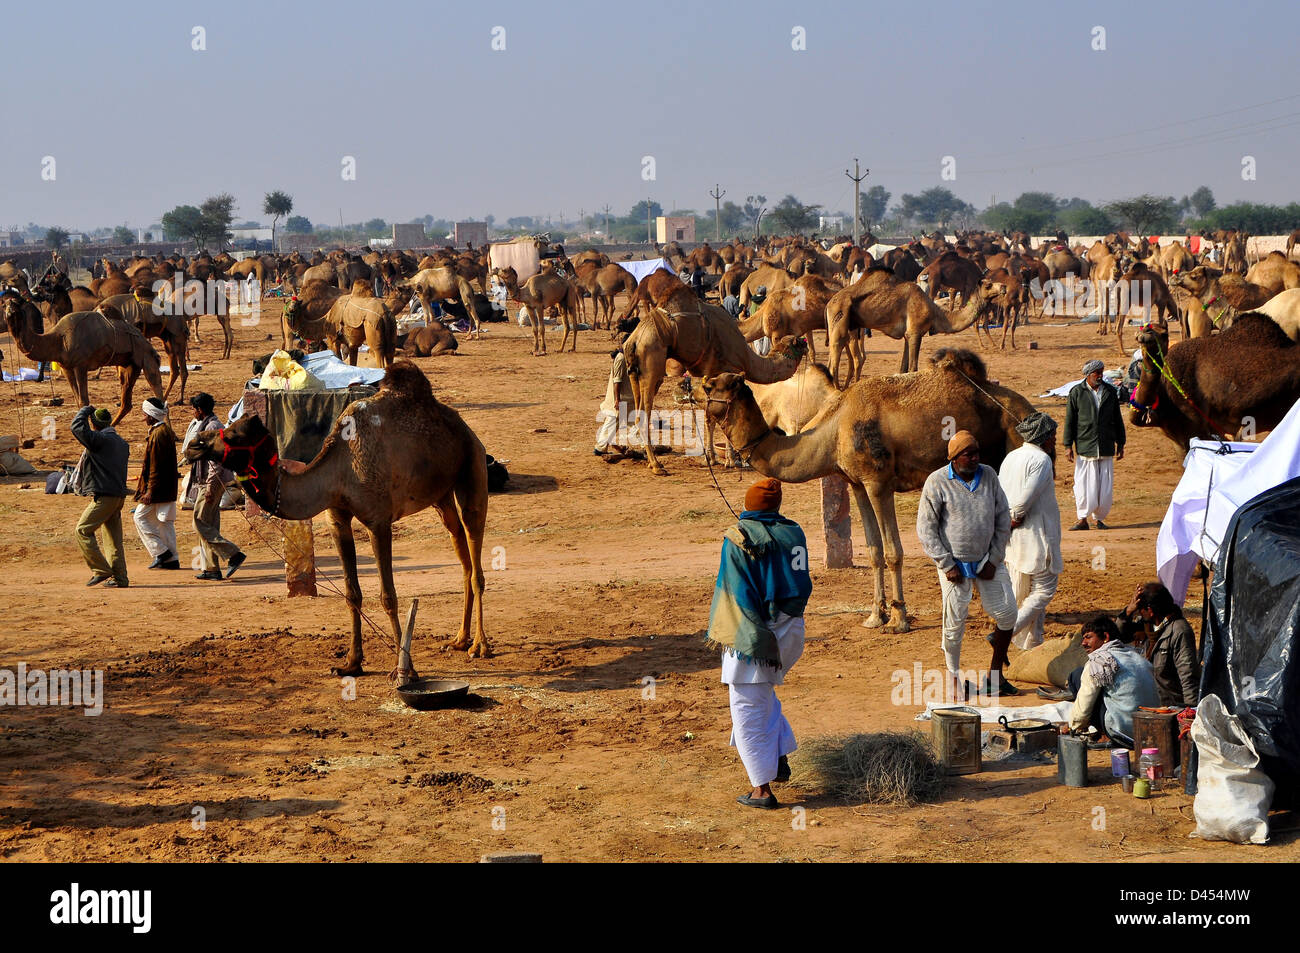 Camels for sale stand in a field at the cattle fair in western Indian town of Nagaur, in Rajasthan state Stock Photo